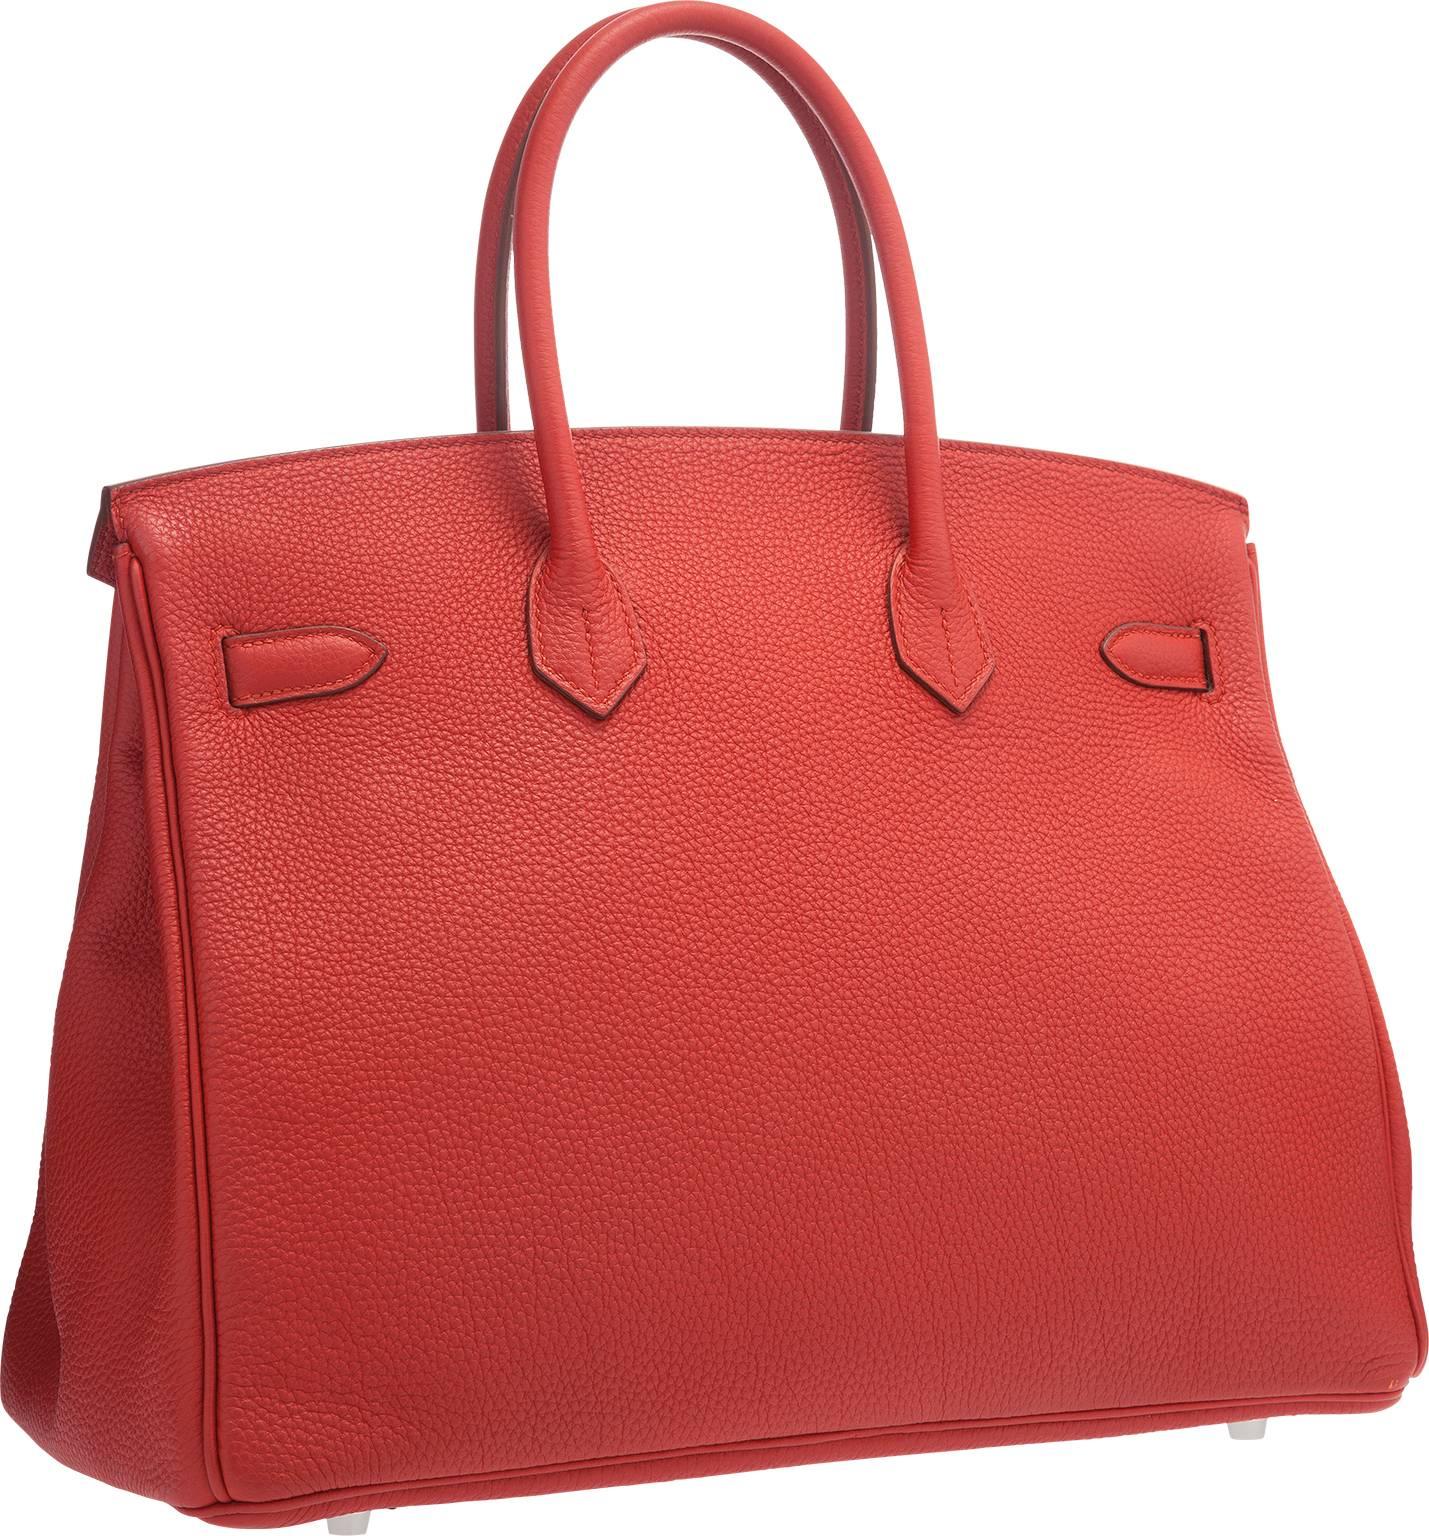 Hermes 35cm Rouge Garance Togo Leather Birkin Bag with Palladium Hardware In Excellent Condition In New York, NY